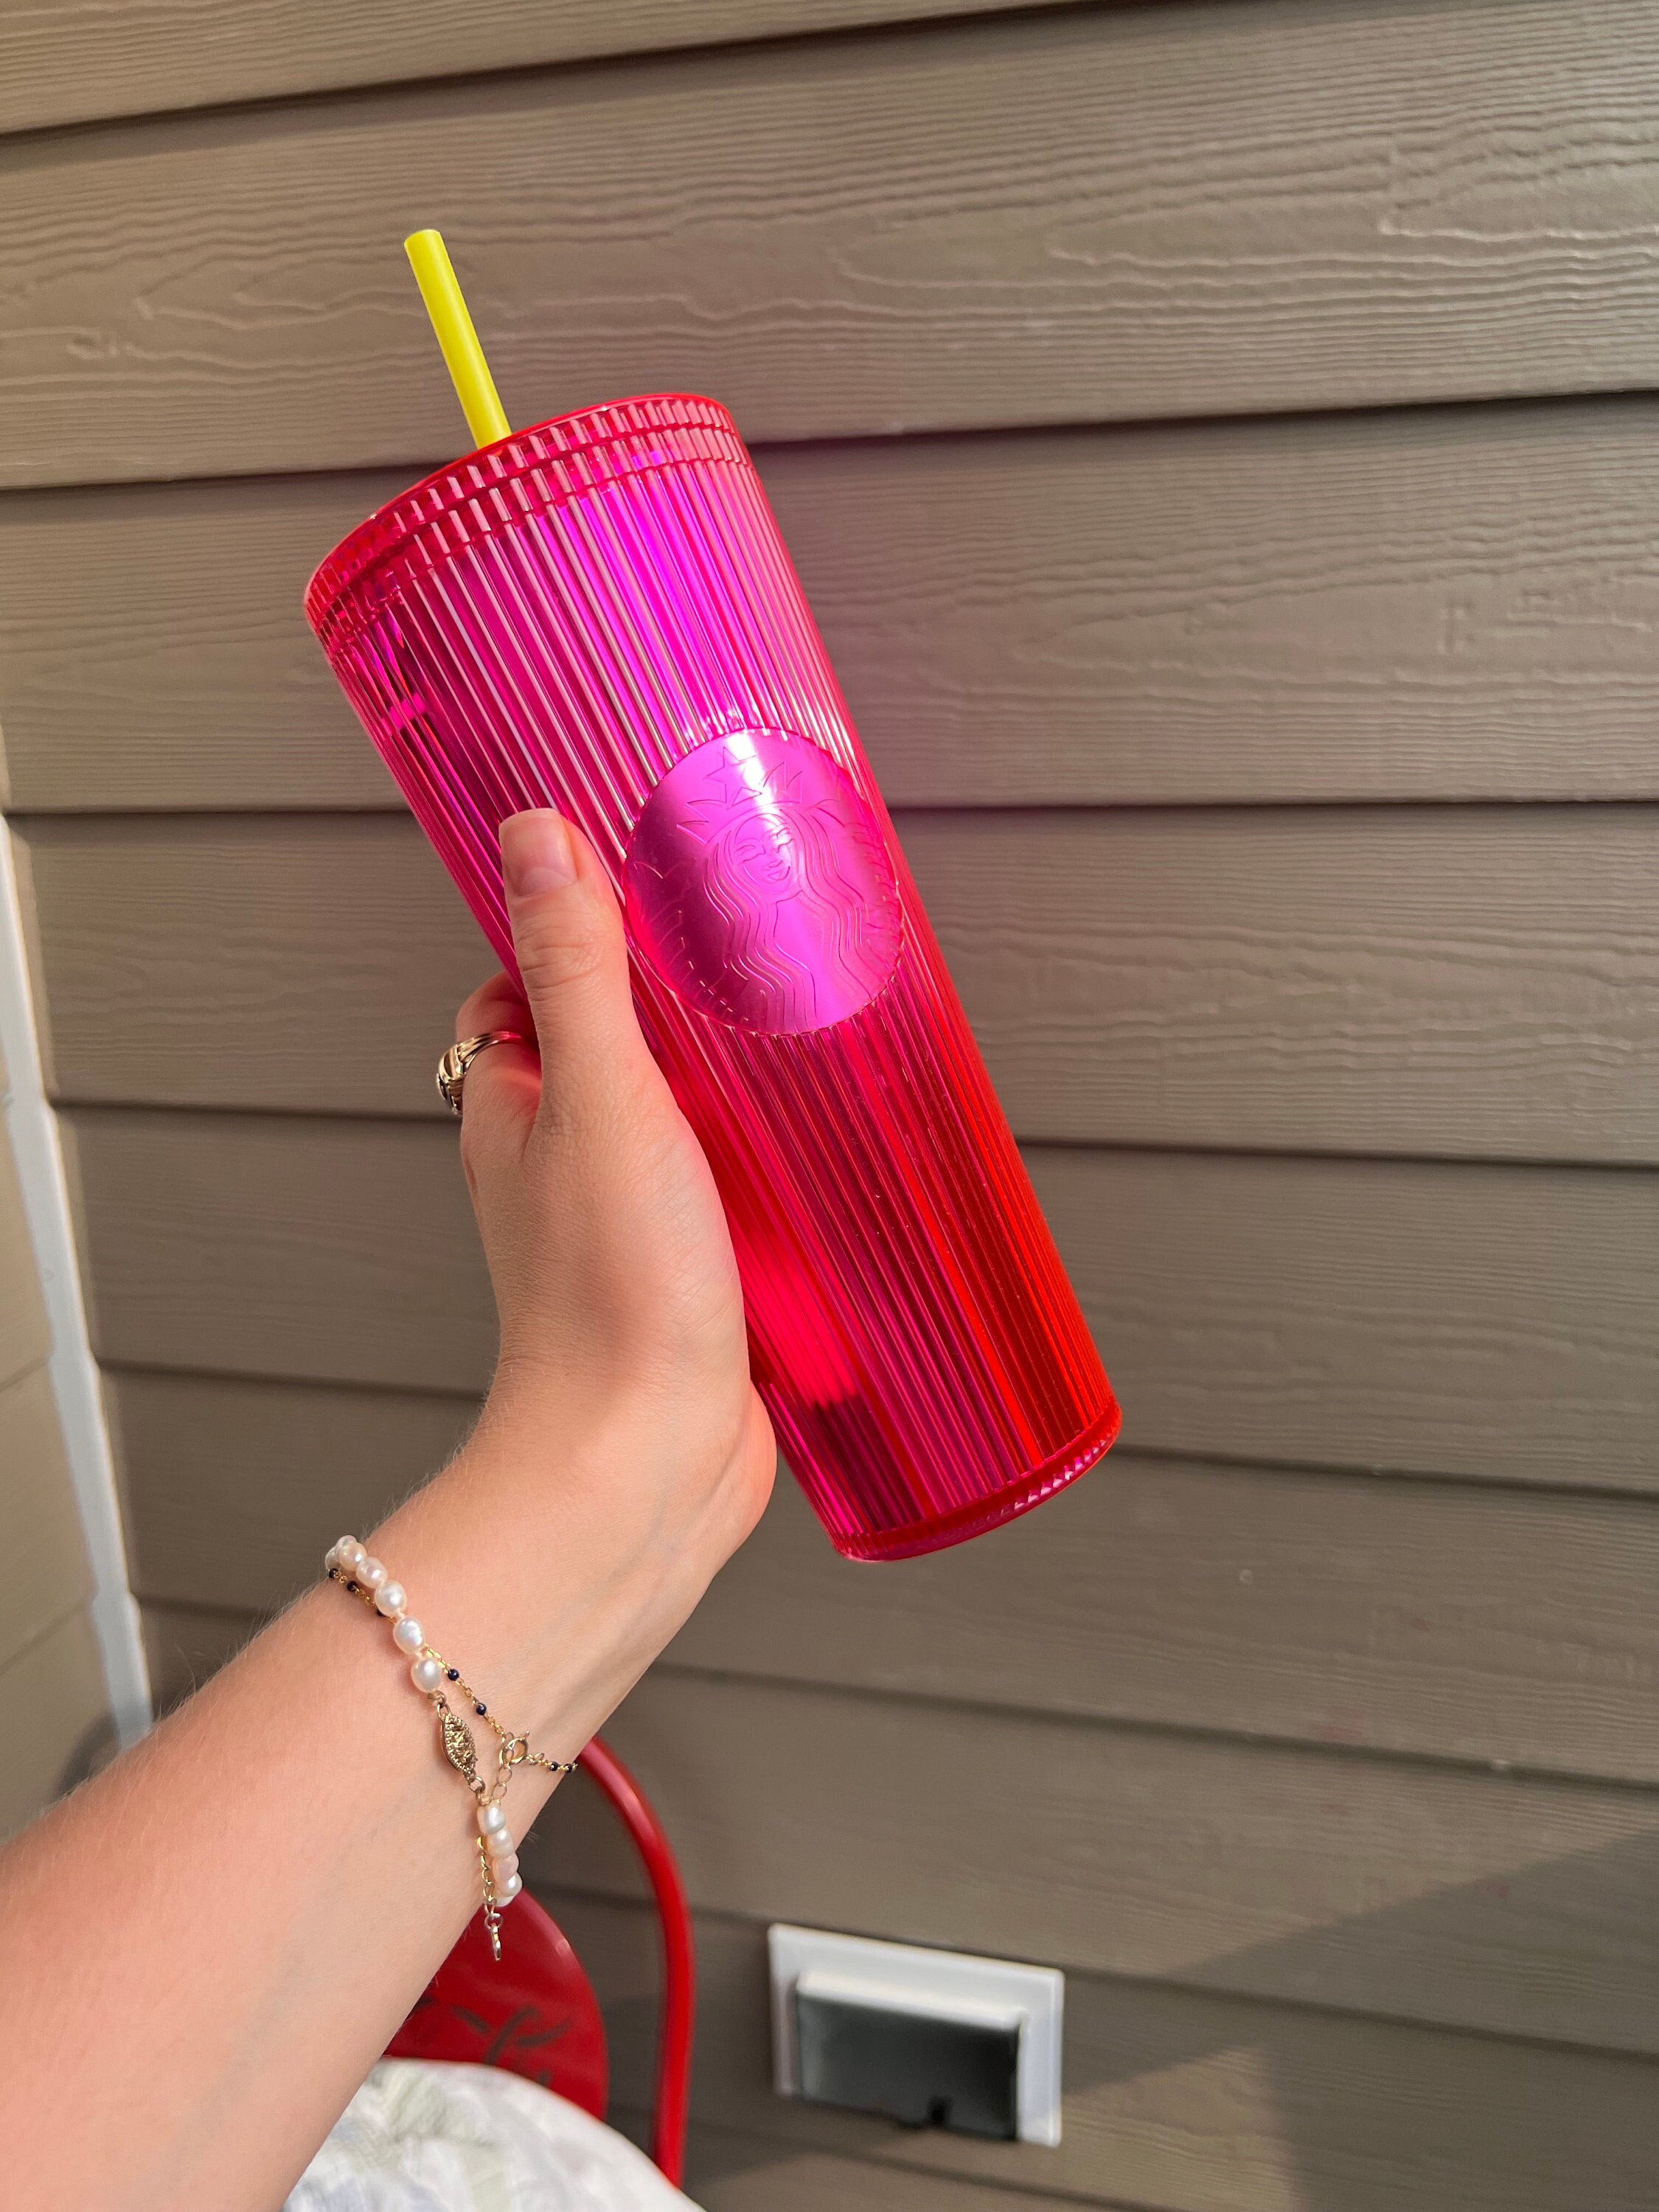 Starbucks Releases Neon Hot Cups Just in Time for Summer